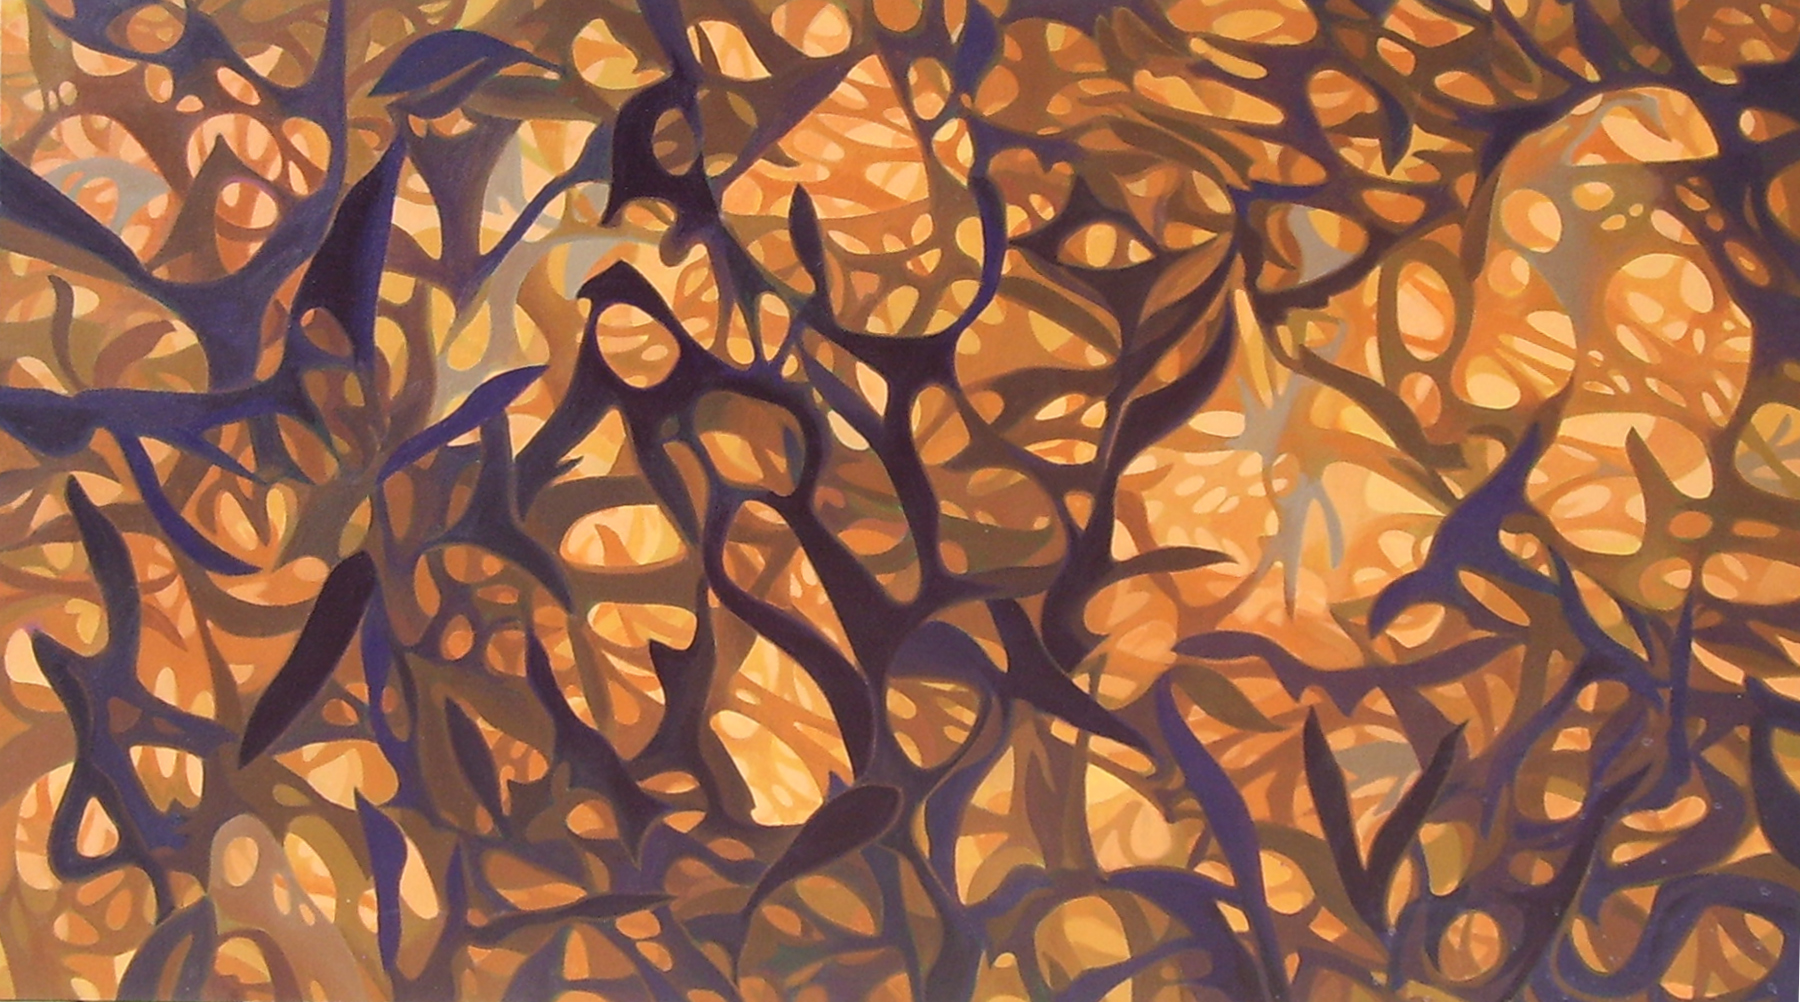  Networks/ 2003/ acrylic on canvas/ 38 x 67 inches 